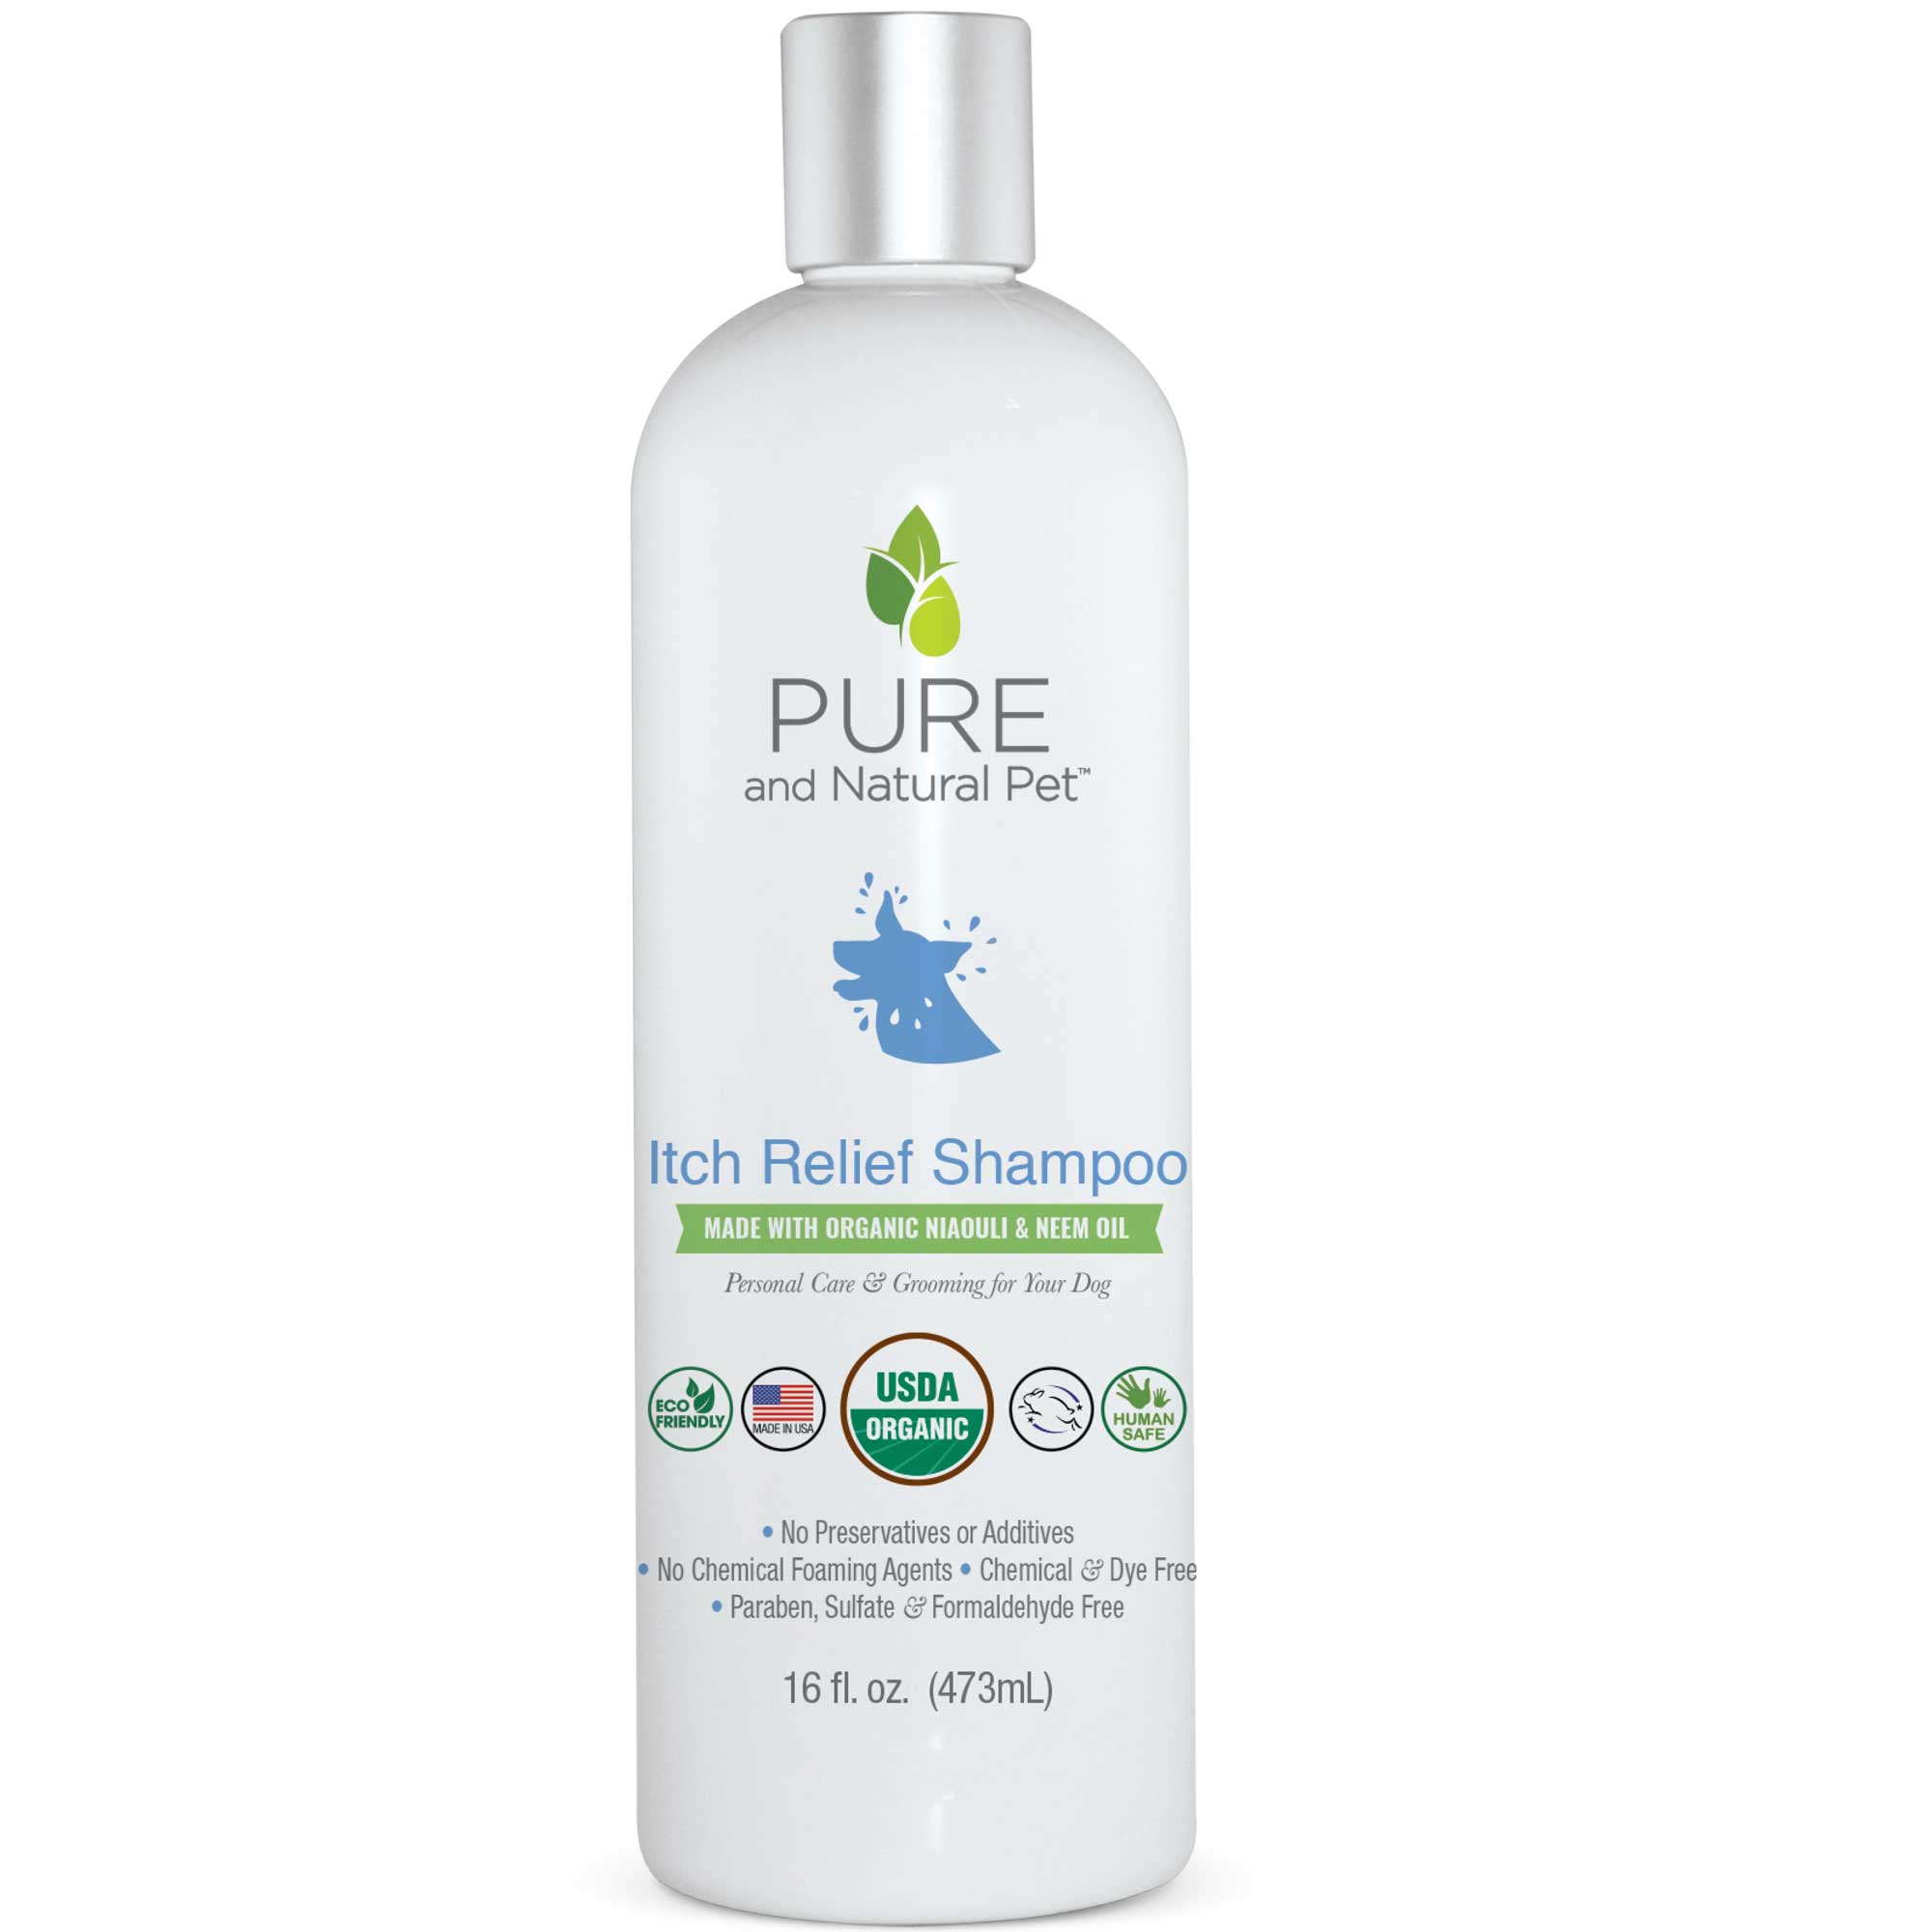 Pure and Natural Pet Itch Relief Shampoo Usage